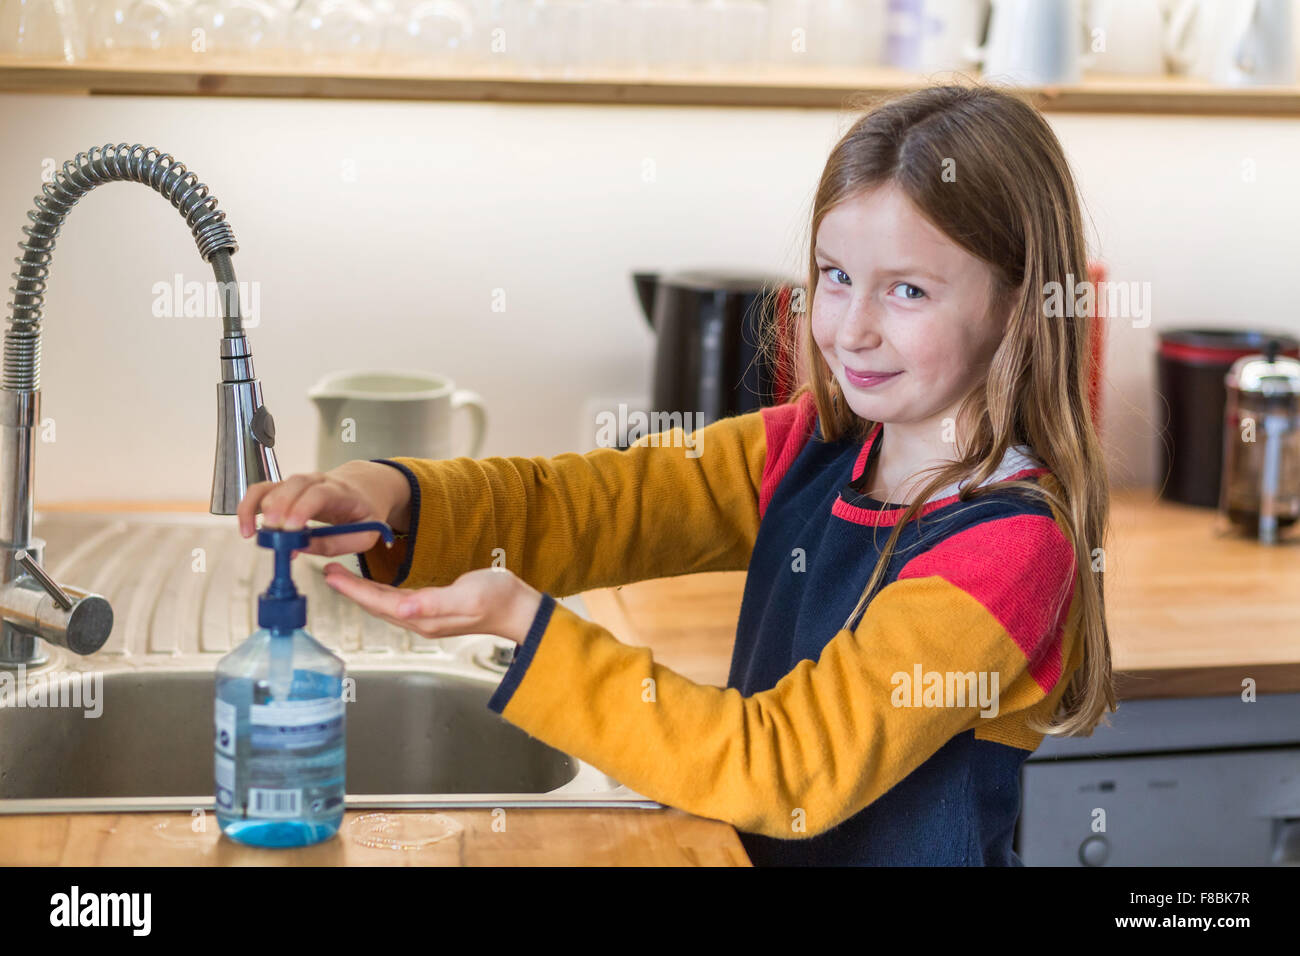 9-years-old child washing her hands with hydroalcoholic gel. Stock Photo